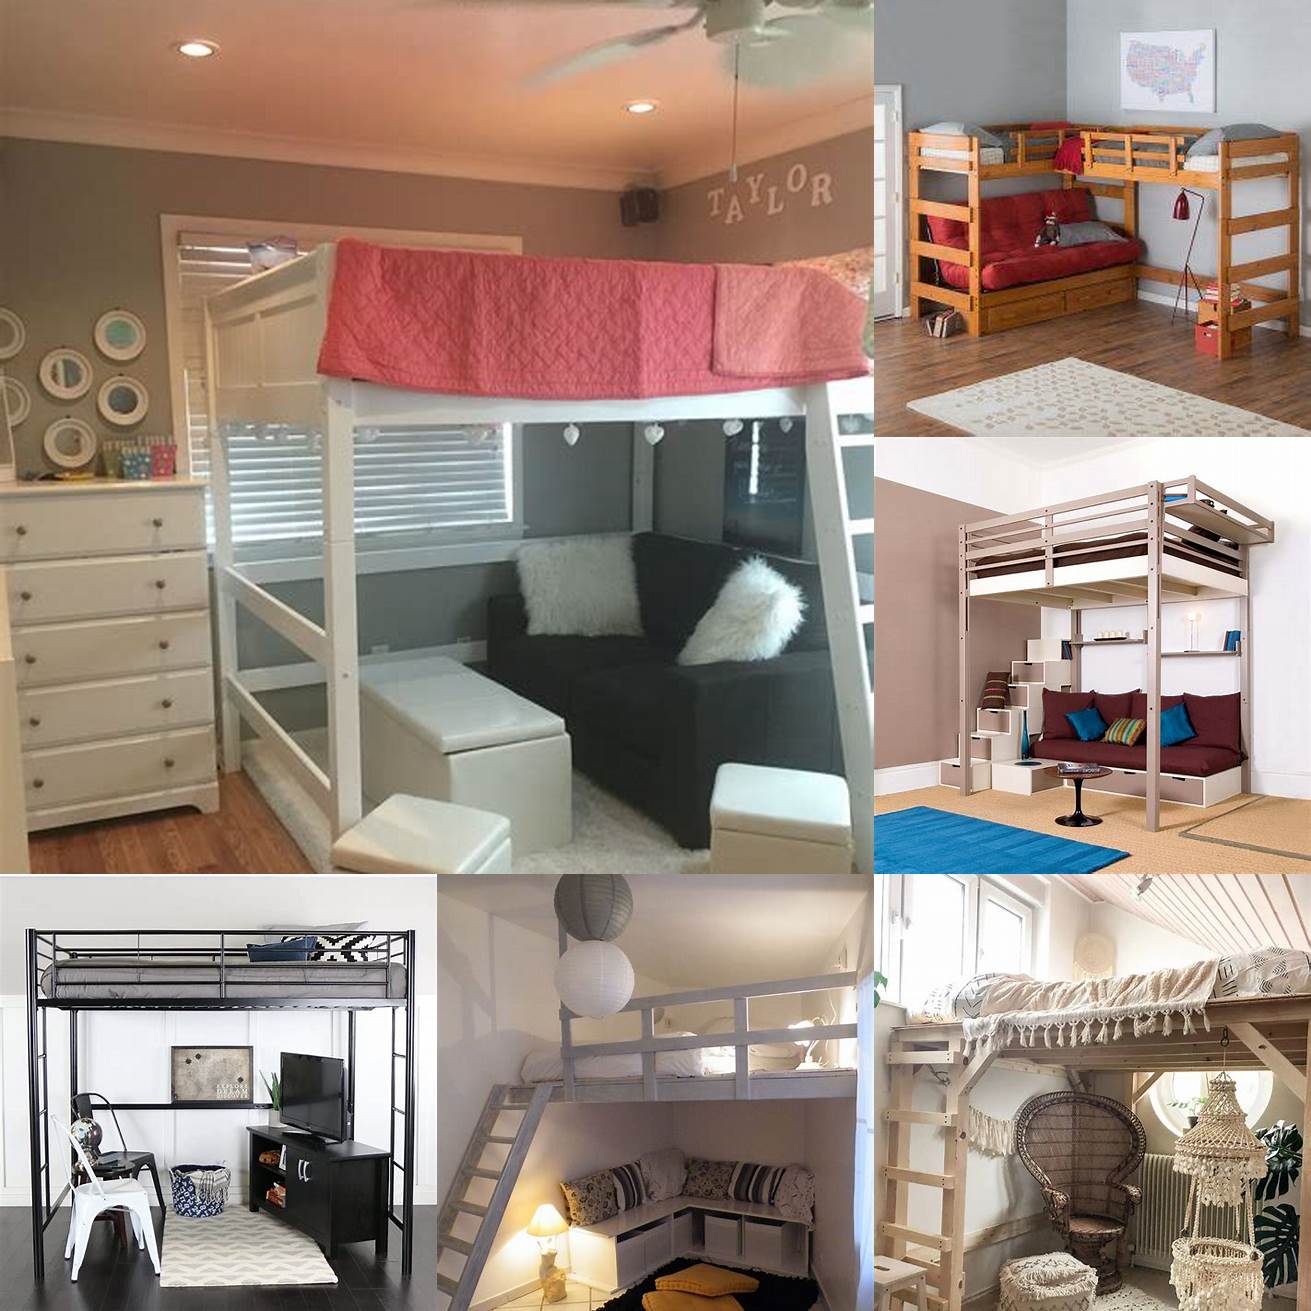 A loft bed with a seating area underneath for relaxing or entertaining